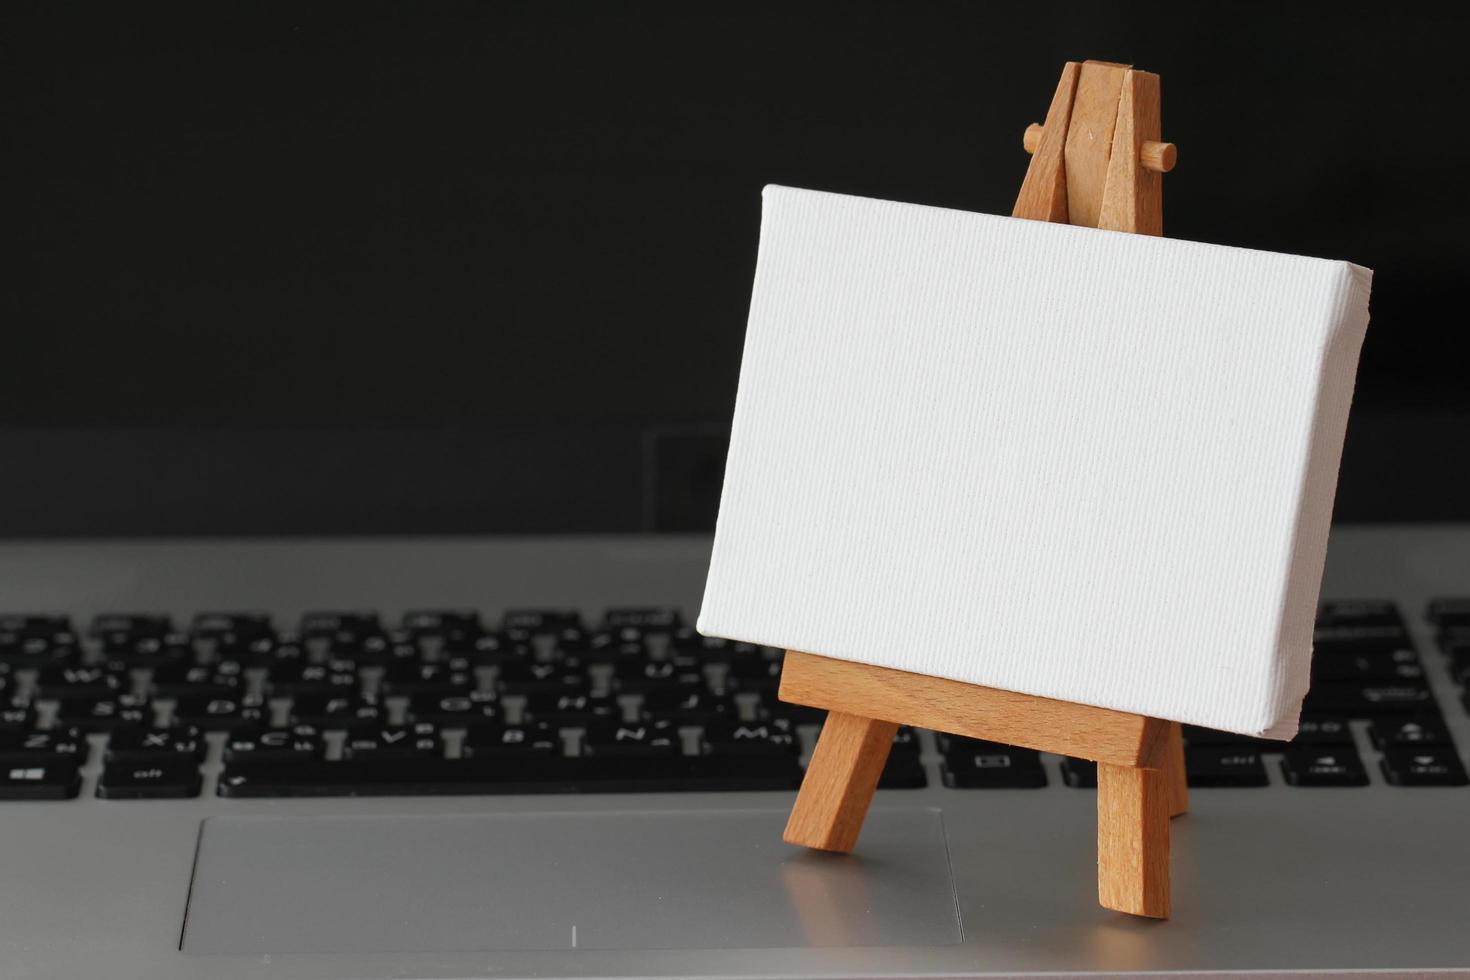 blank canvas and wooden easel on laptop computer as concept photo